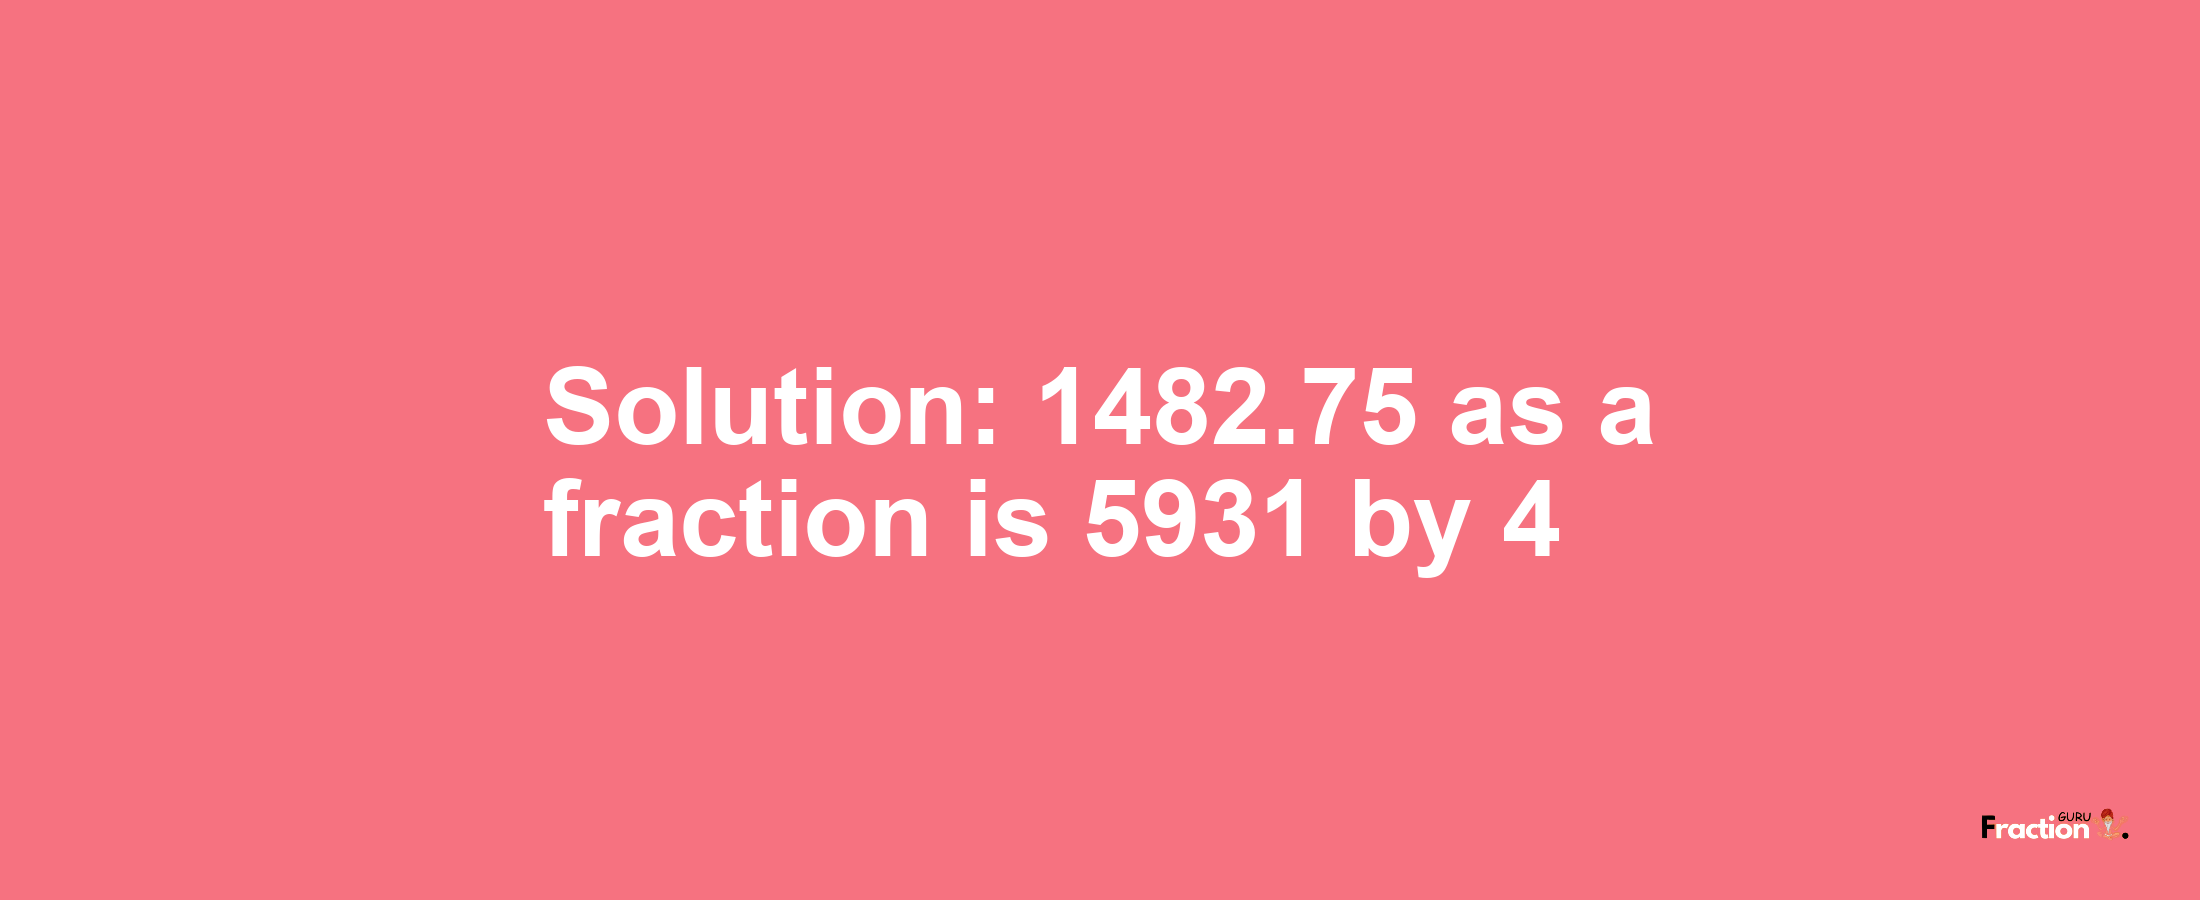 Solution:1482.75 as a fraction is 5931/4